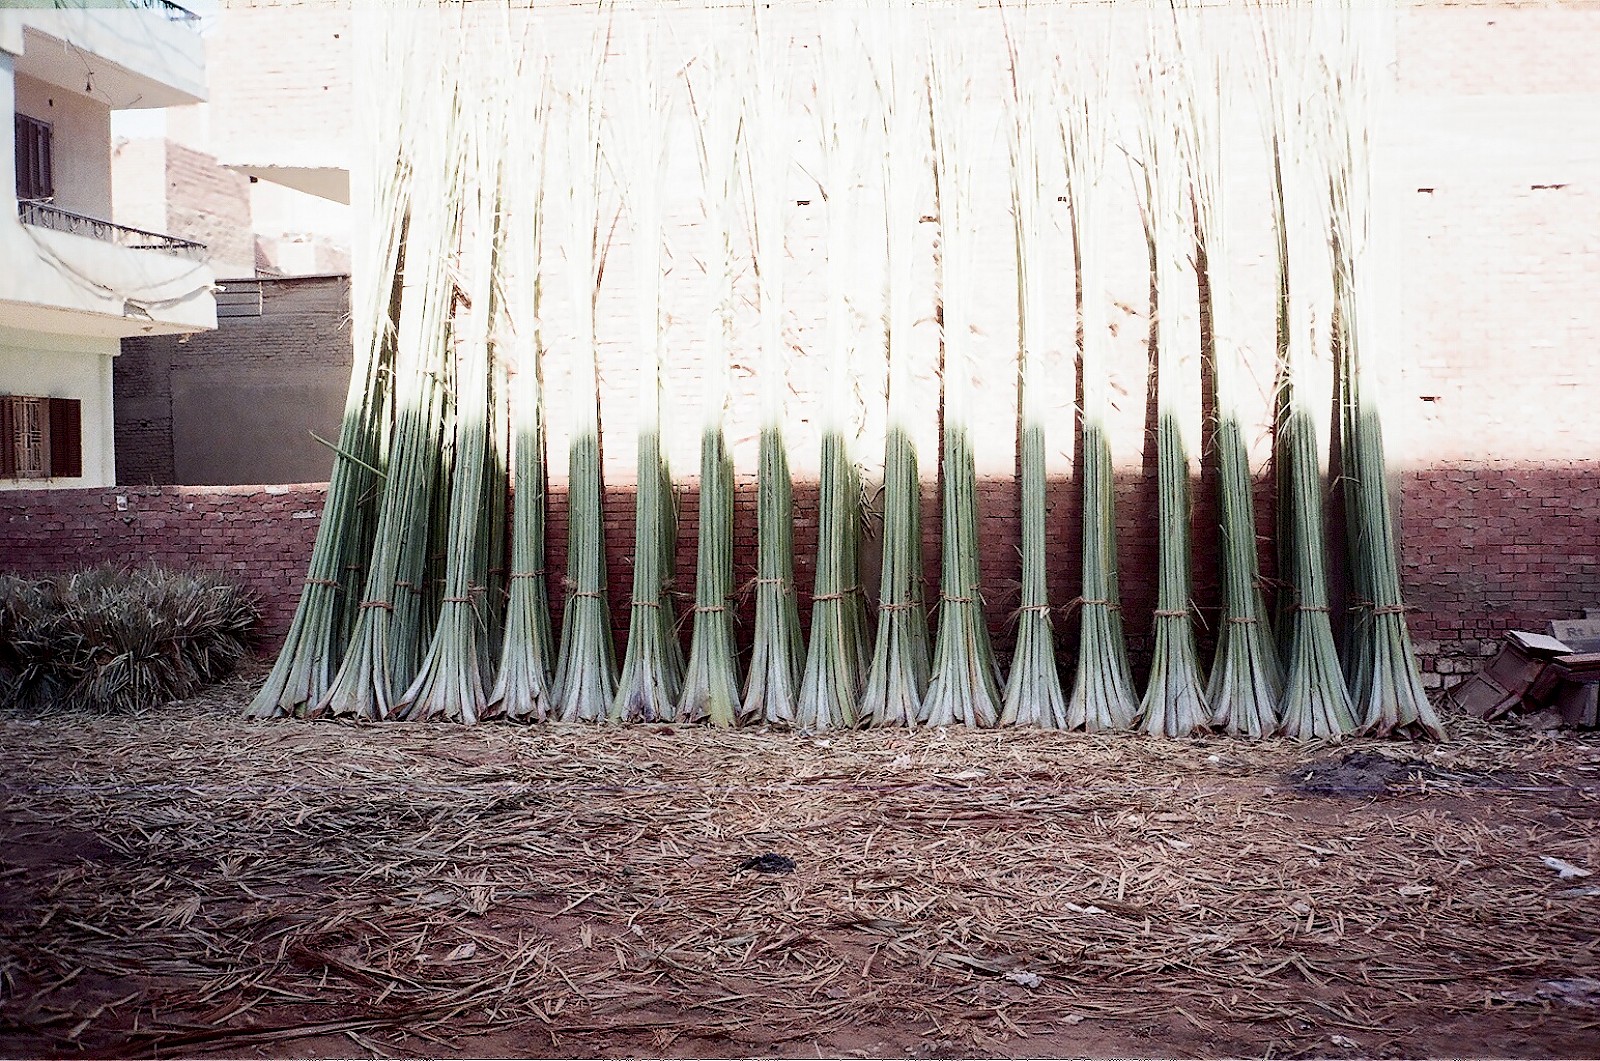 Image - Palm wood drying in the sun